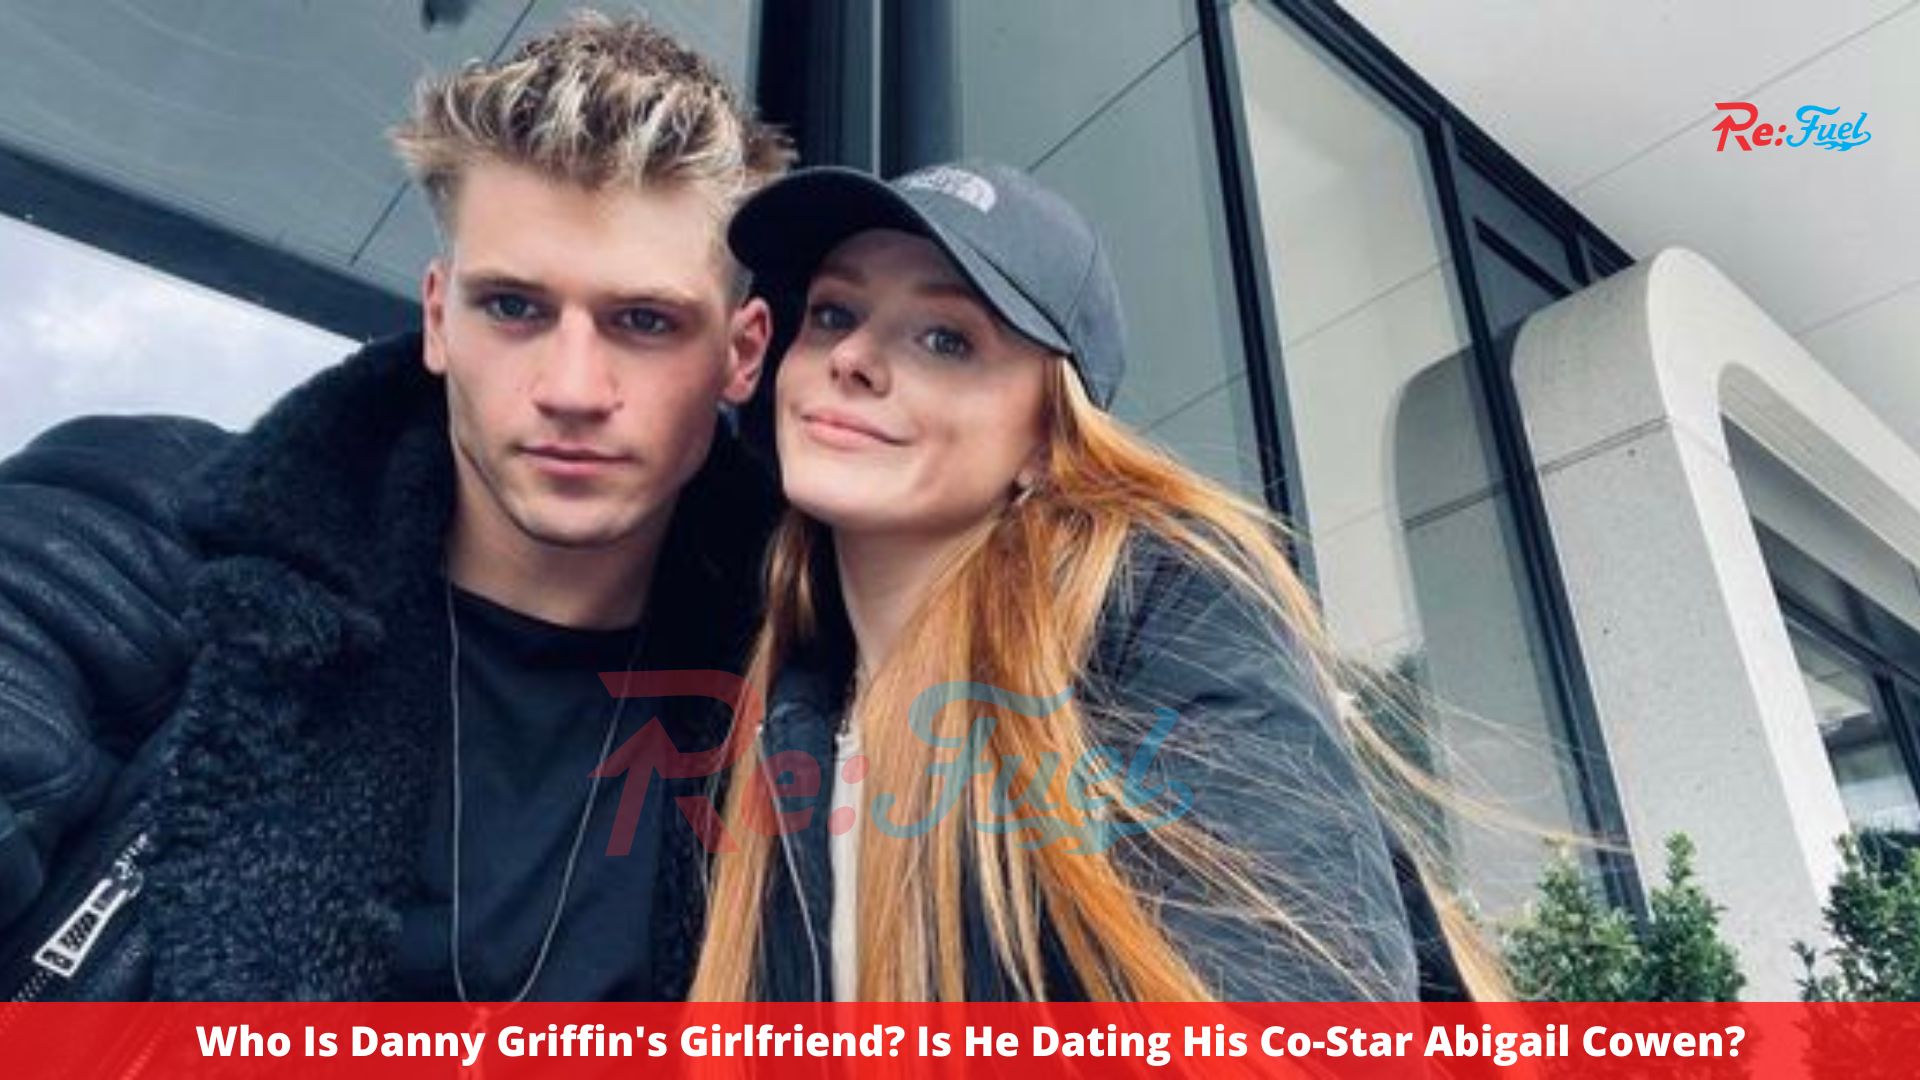 Who Is Danny Griffin's Girlfriend? Is He Dating His Co-Star Abigail Cowen?